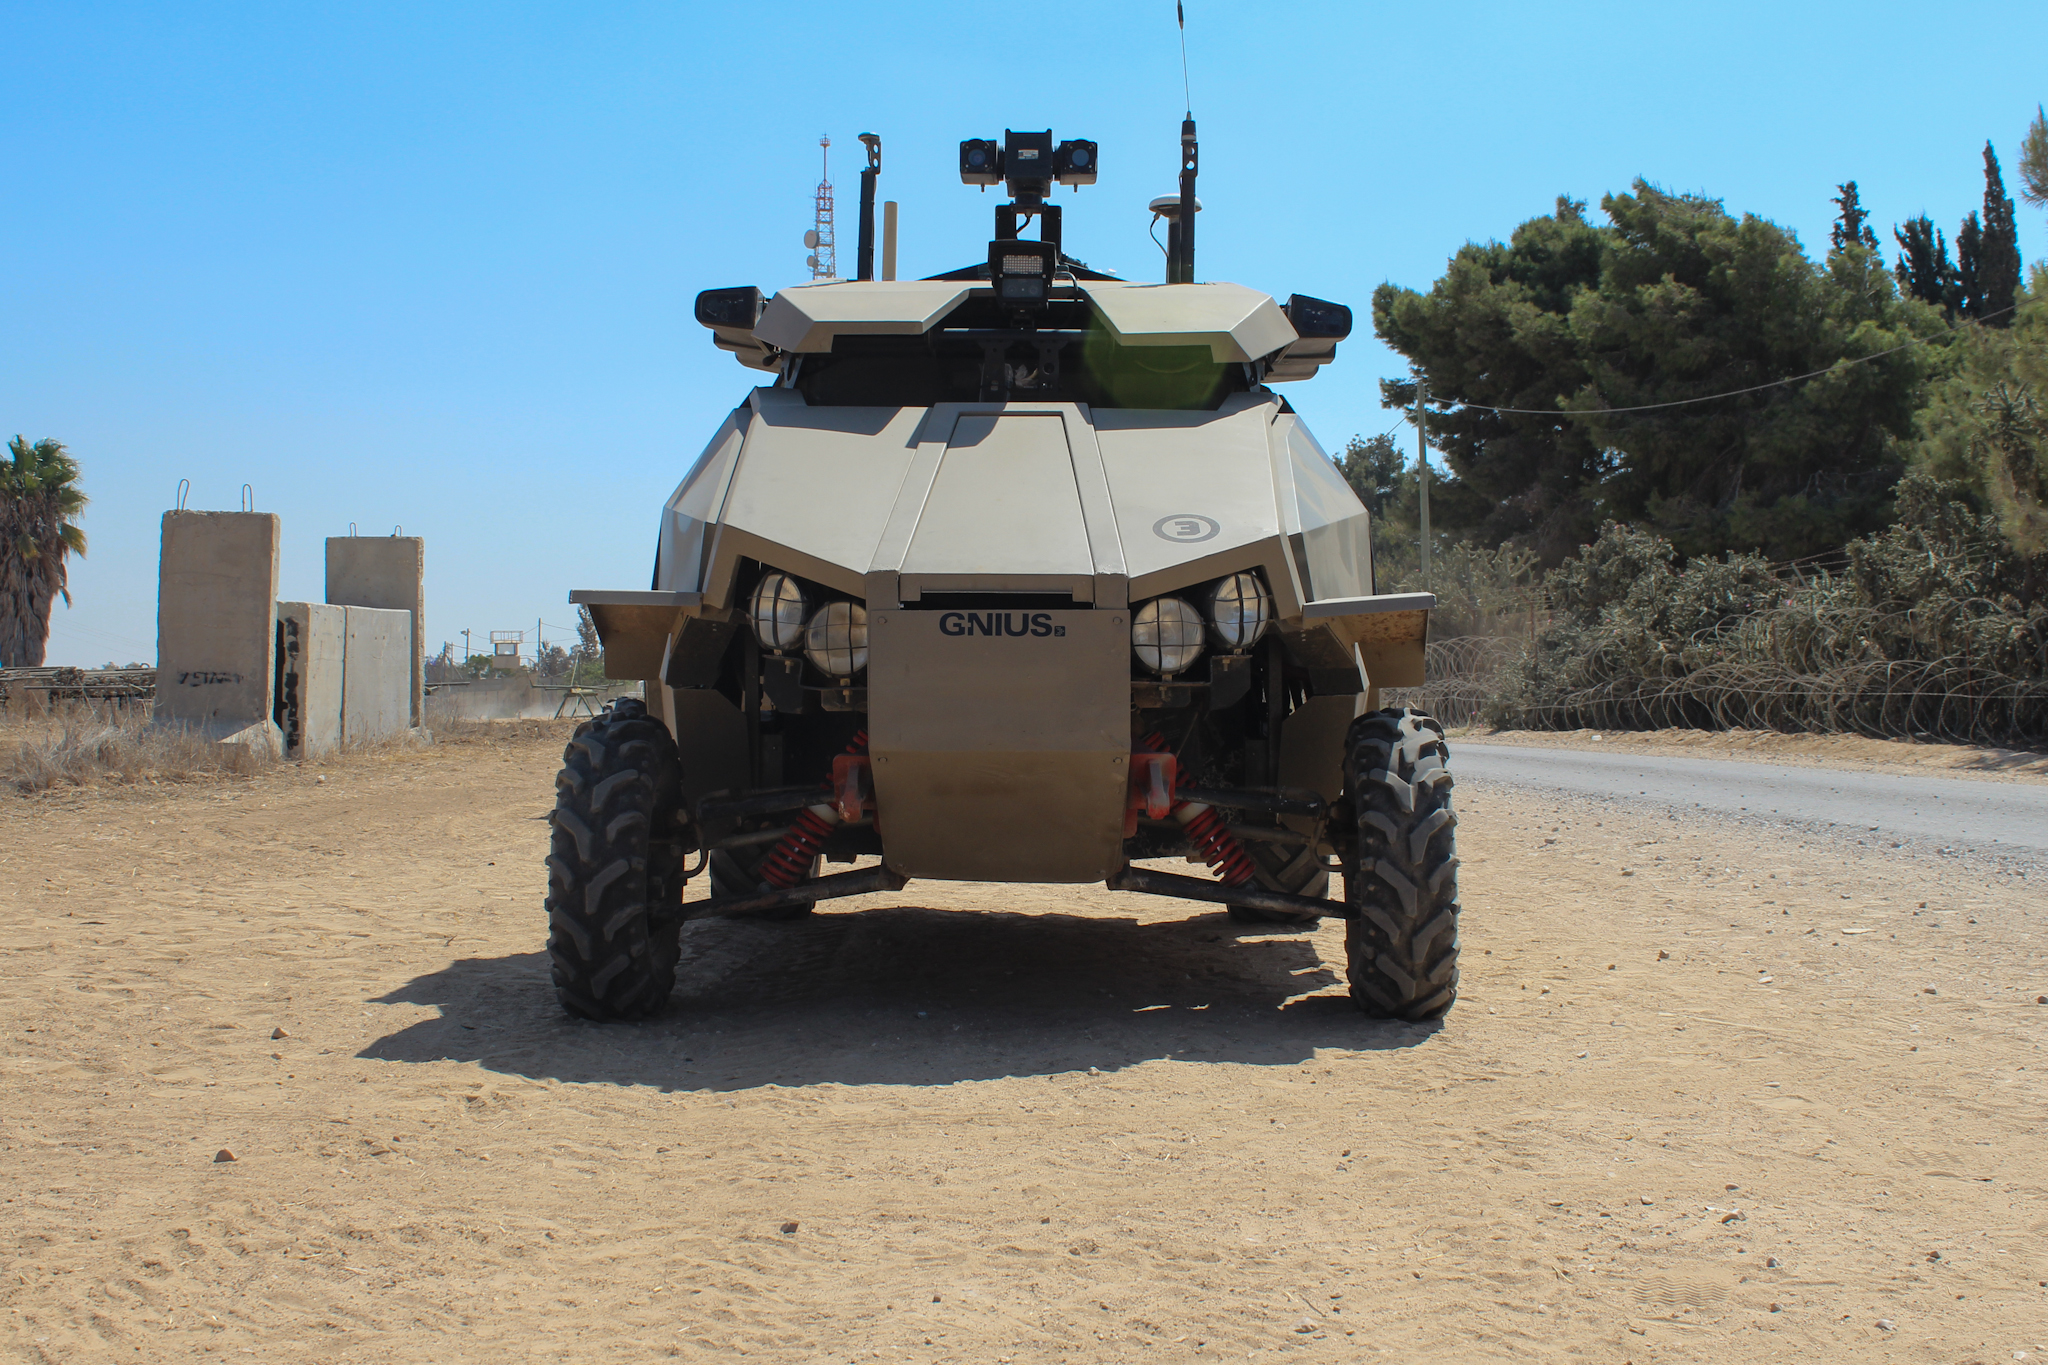 Verification Is Possible: Checking Compliance With an Autonomous Weapon Ban